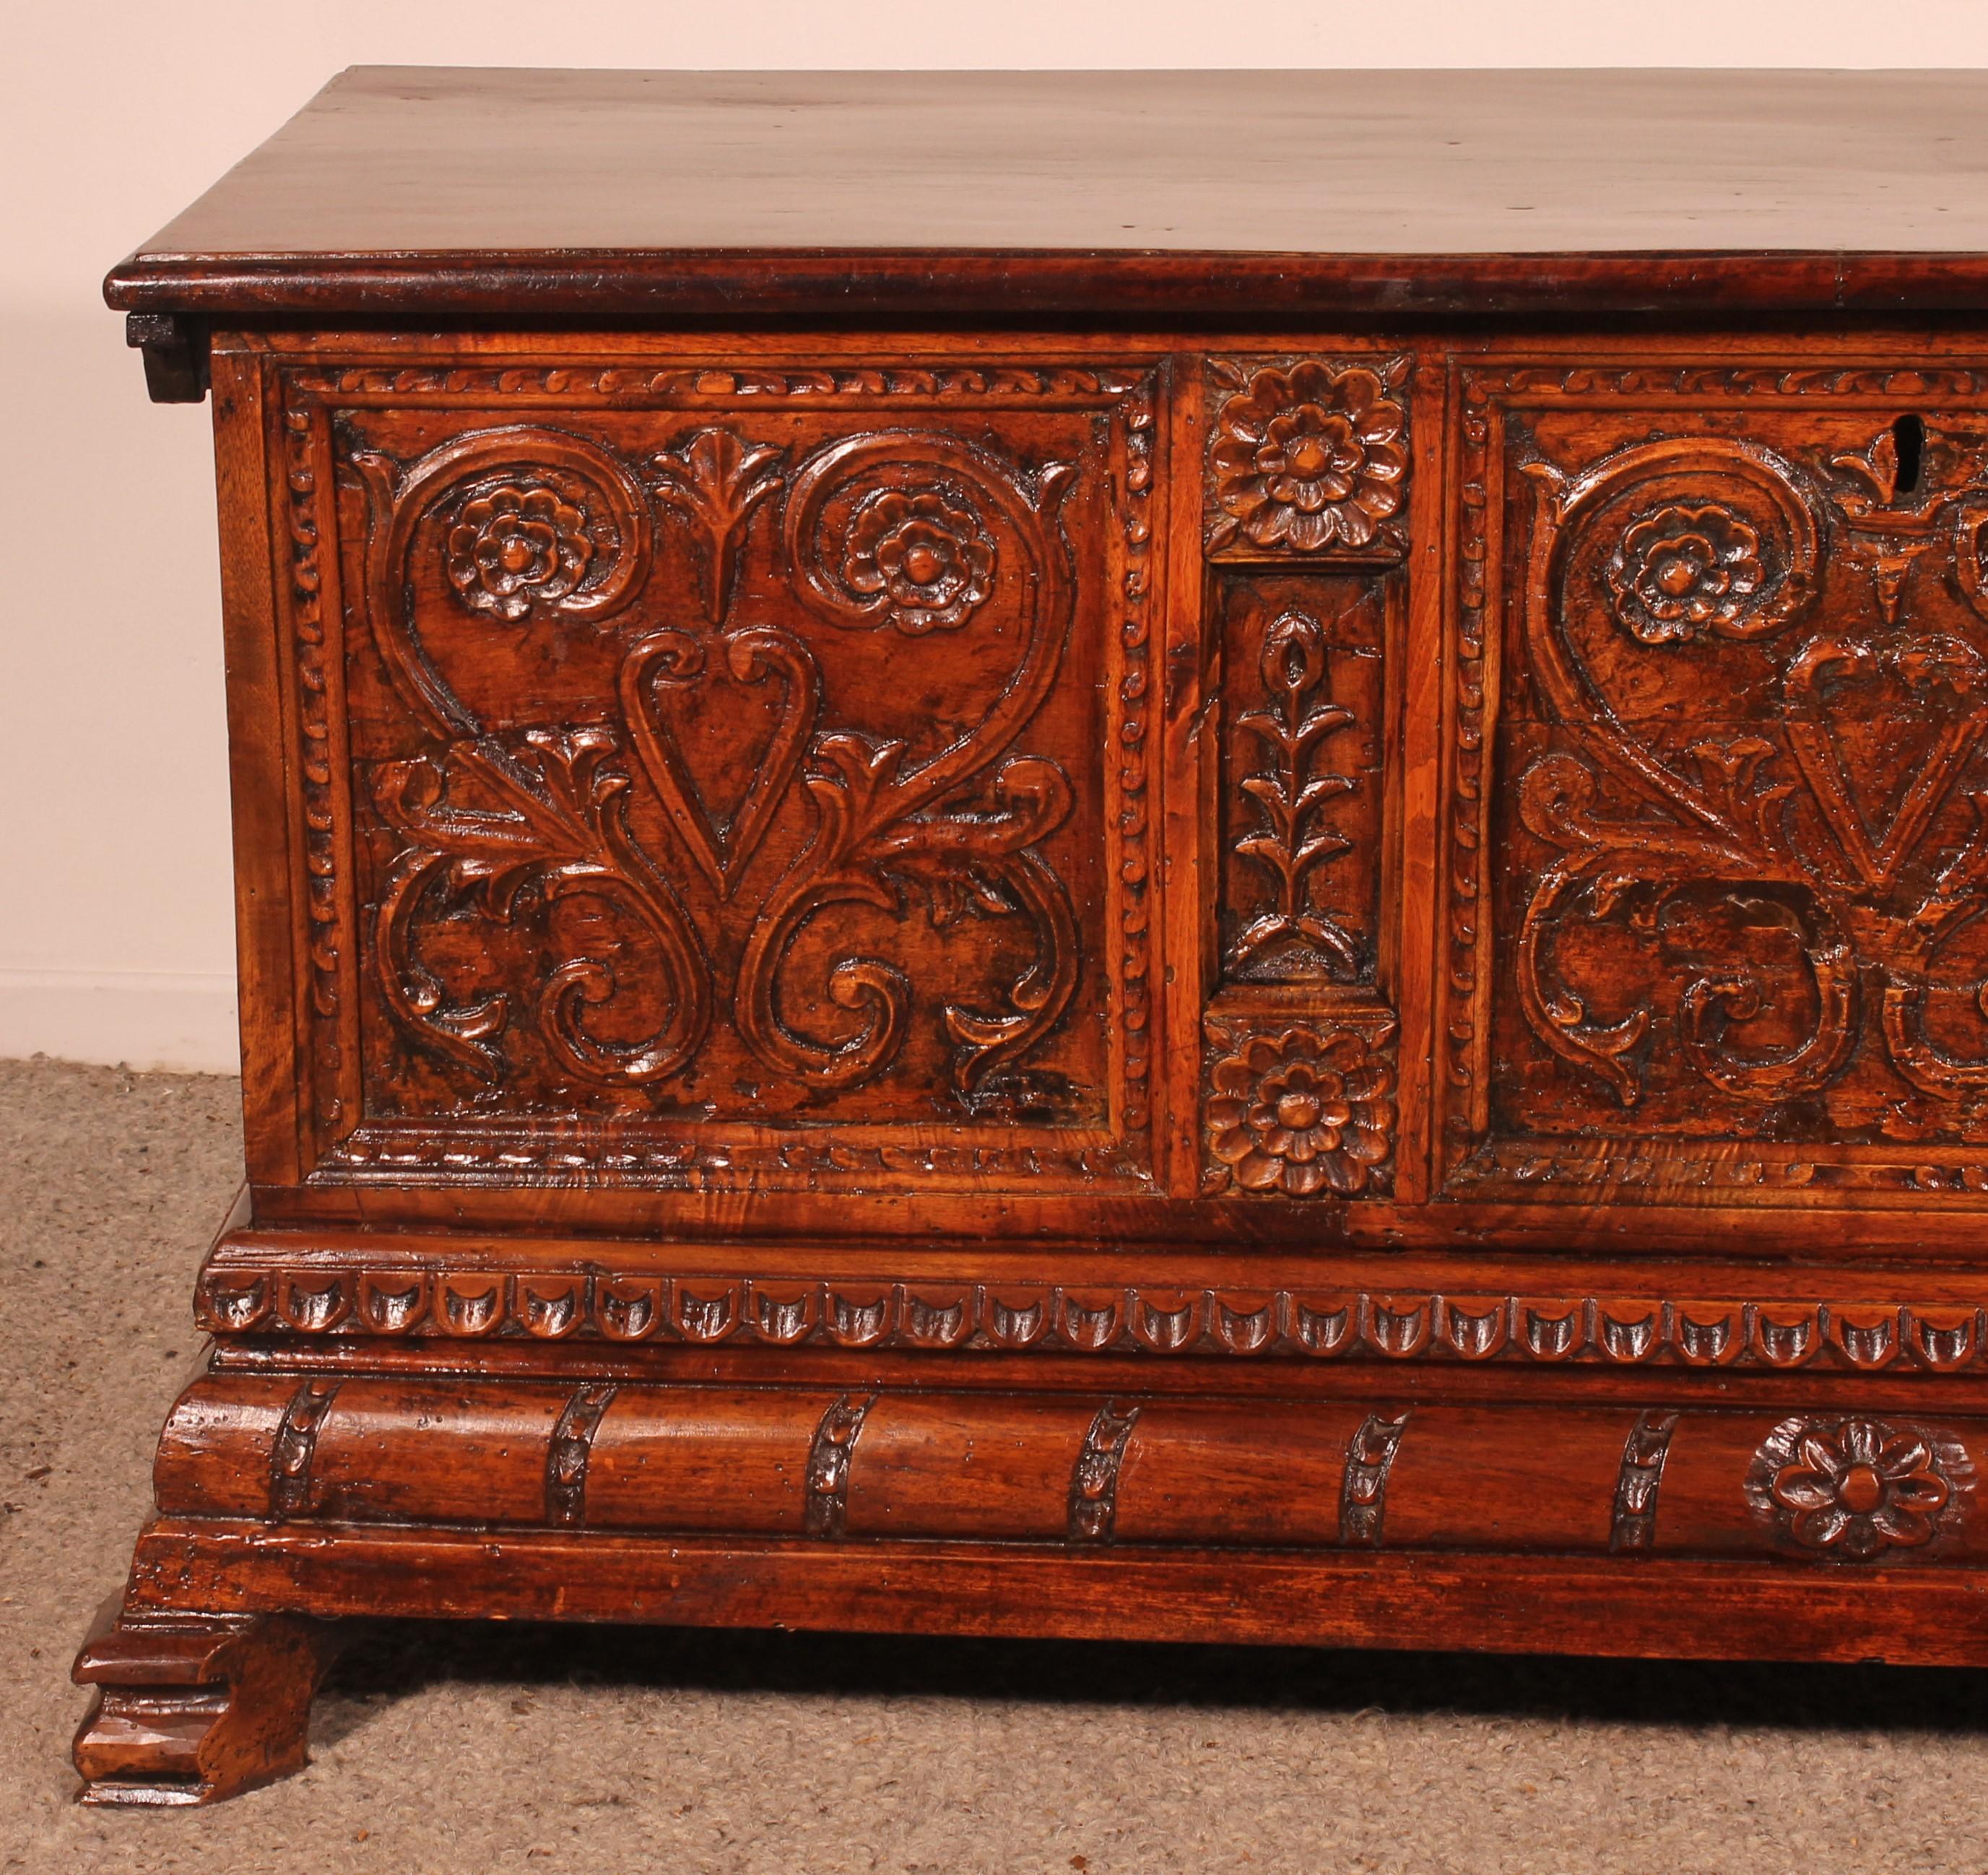 superb Catalan walnut chest from the beginning of the 18th century

Very beautiful chest from the region of Catalonia which is very probably a wedding chest since we can find a heart in the center of the panels

Very beautiful one-piece walnut top